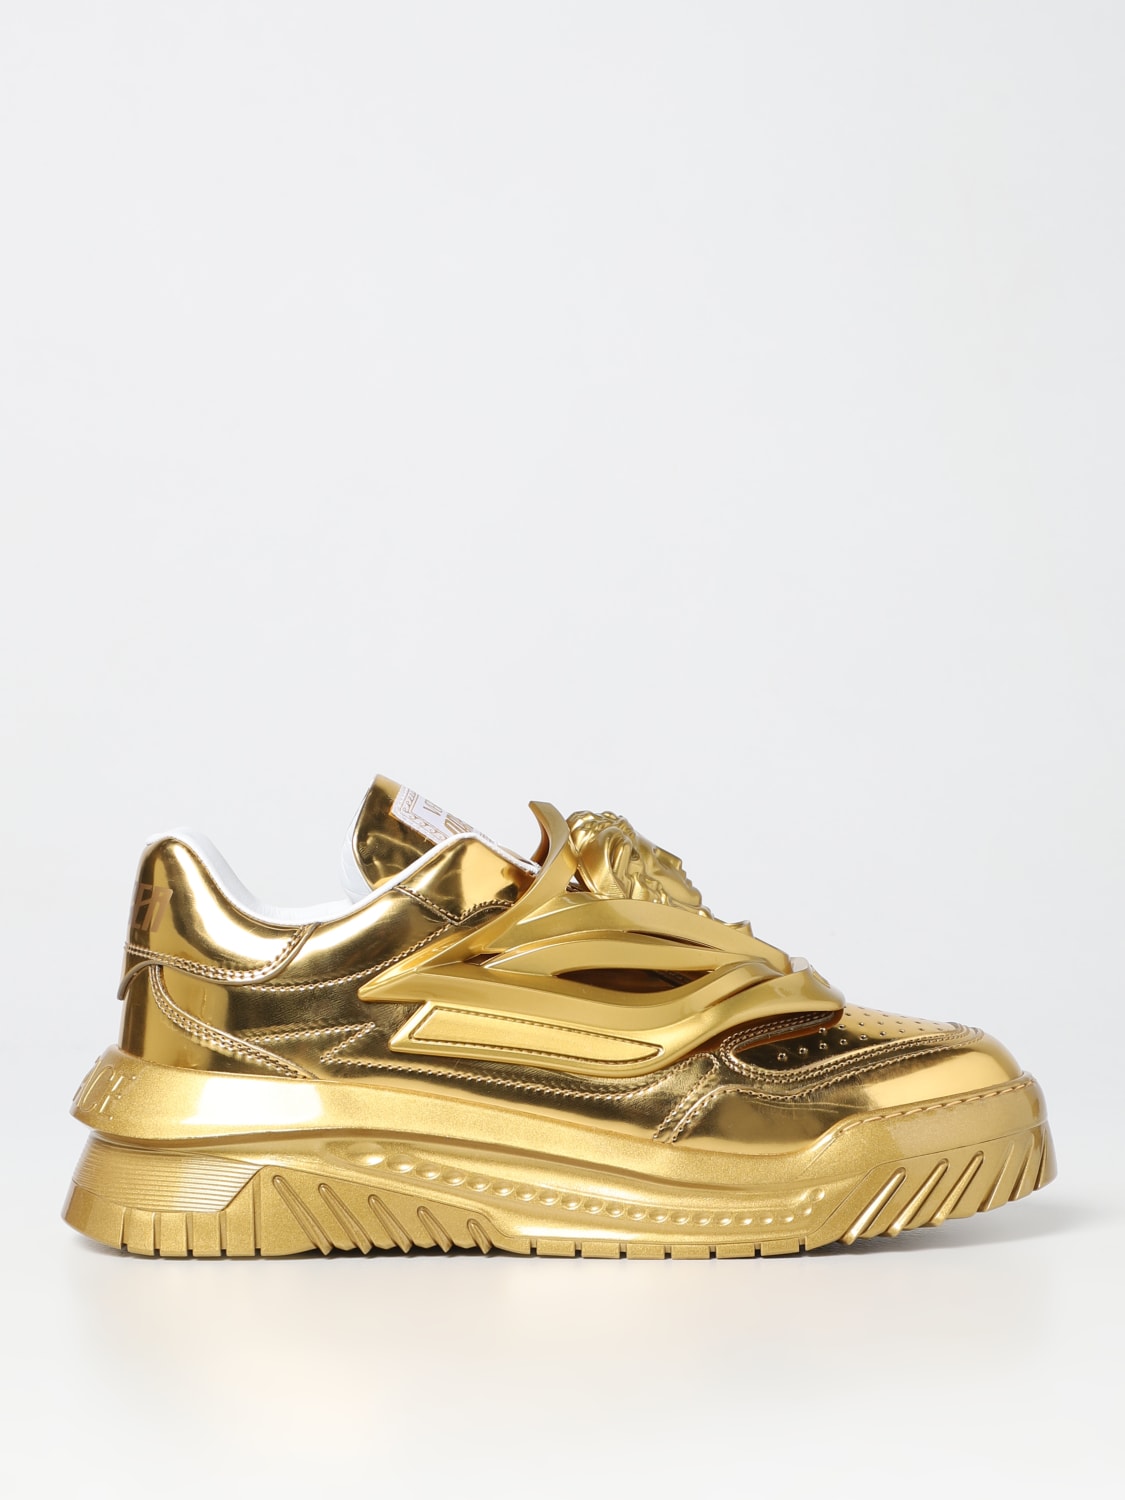 VERSACE: odyssey sneakers in patent leather - Gold | Versace sneakers 10045241A02259 at GIGLIO.COM